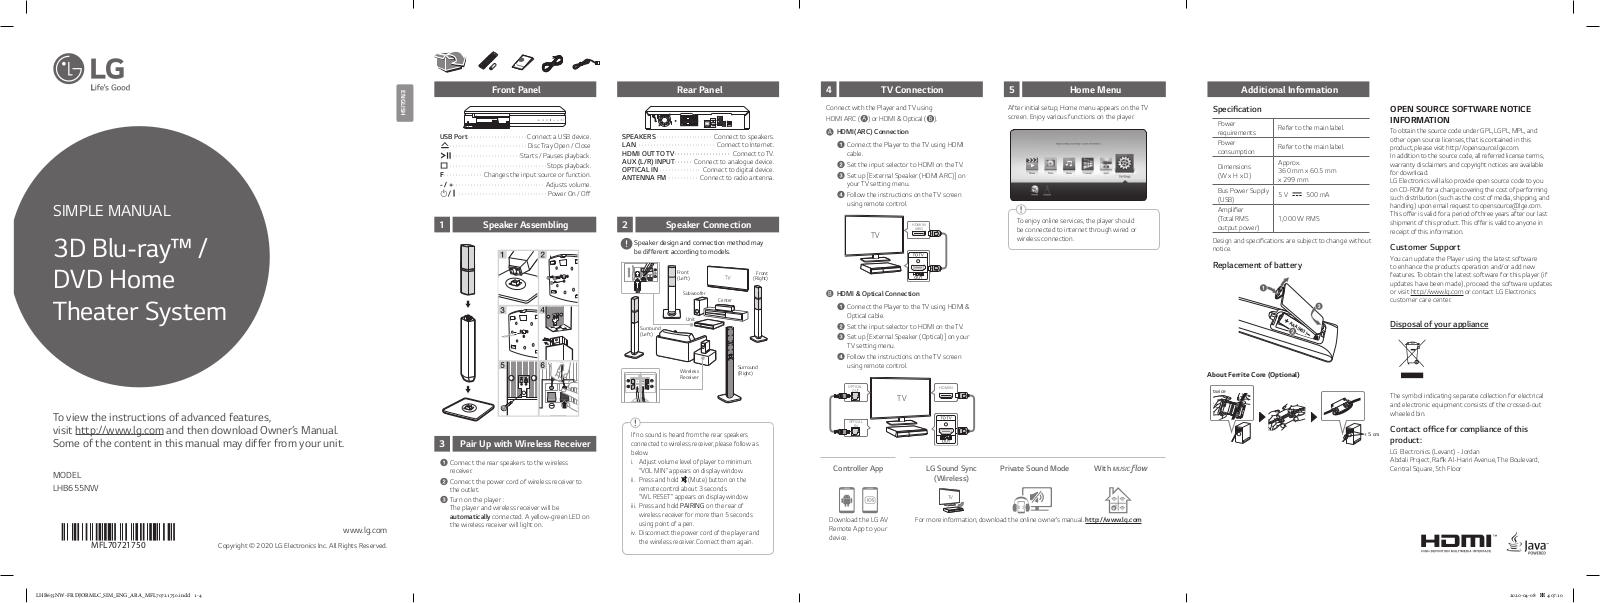 LG LHB655NW User Guide